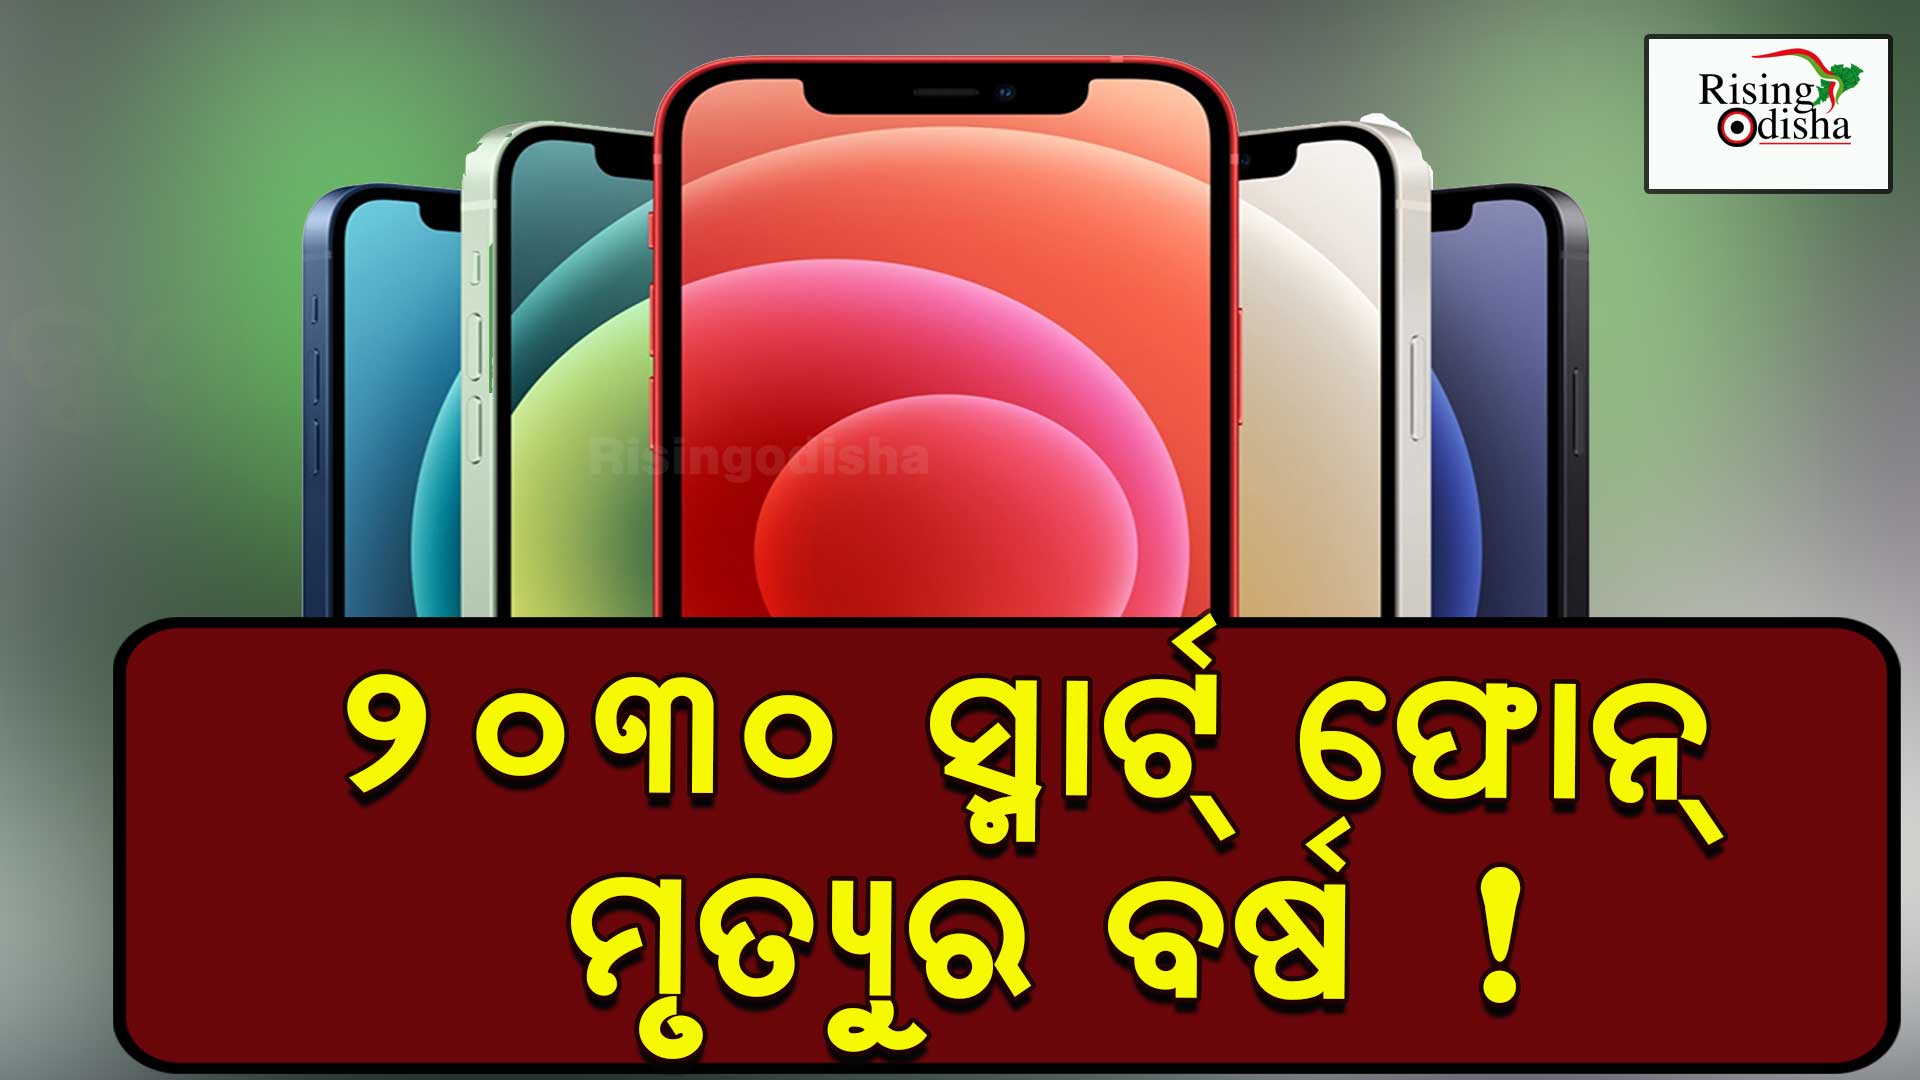 future of smartphones 2030, what will phones be like in 2030, what will technology be like in 2030, odiablog, risingodisha